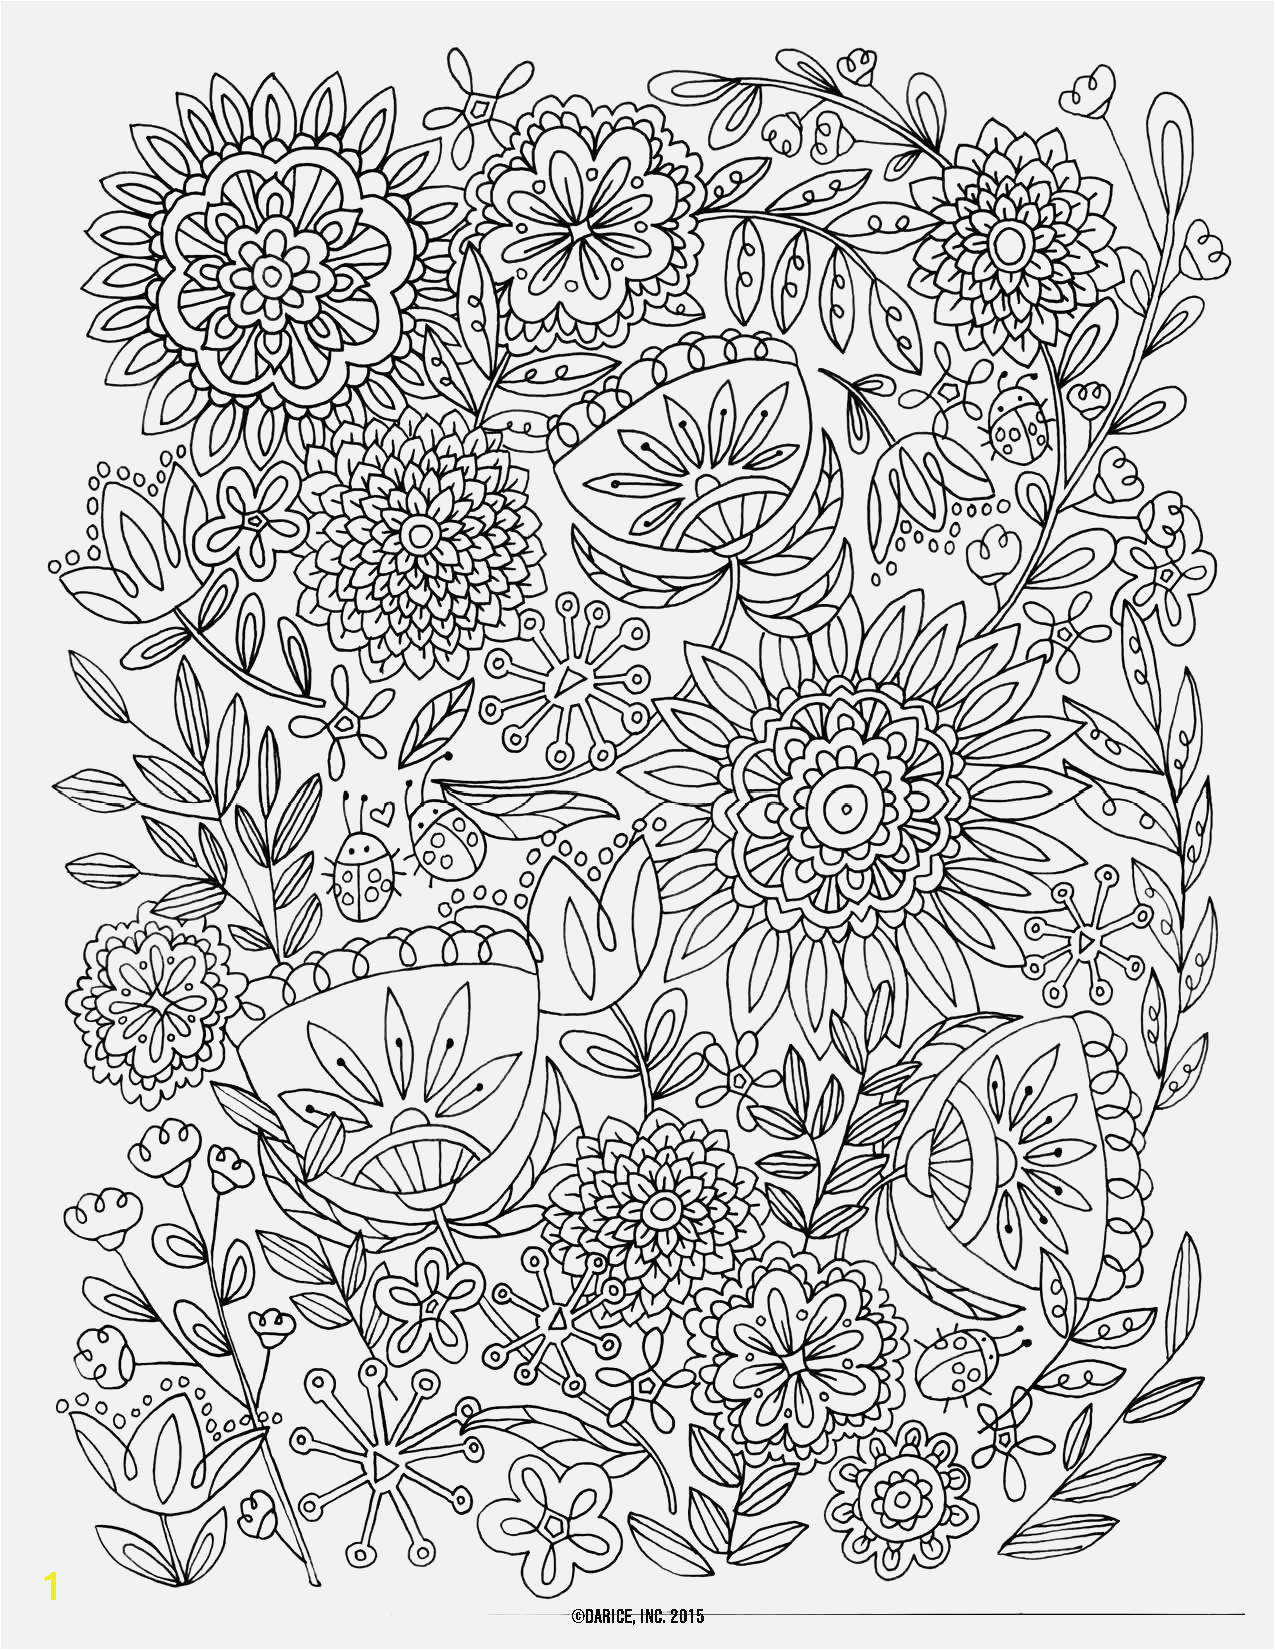 Coloring Pages Hard Coloring Pages Hard Easy and Fun Adult Coloring Book Pages Fresh